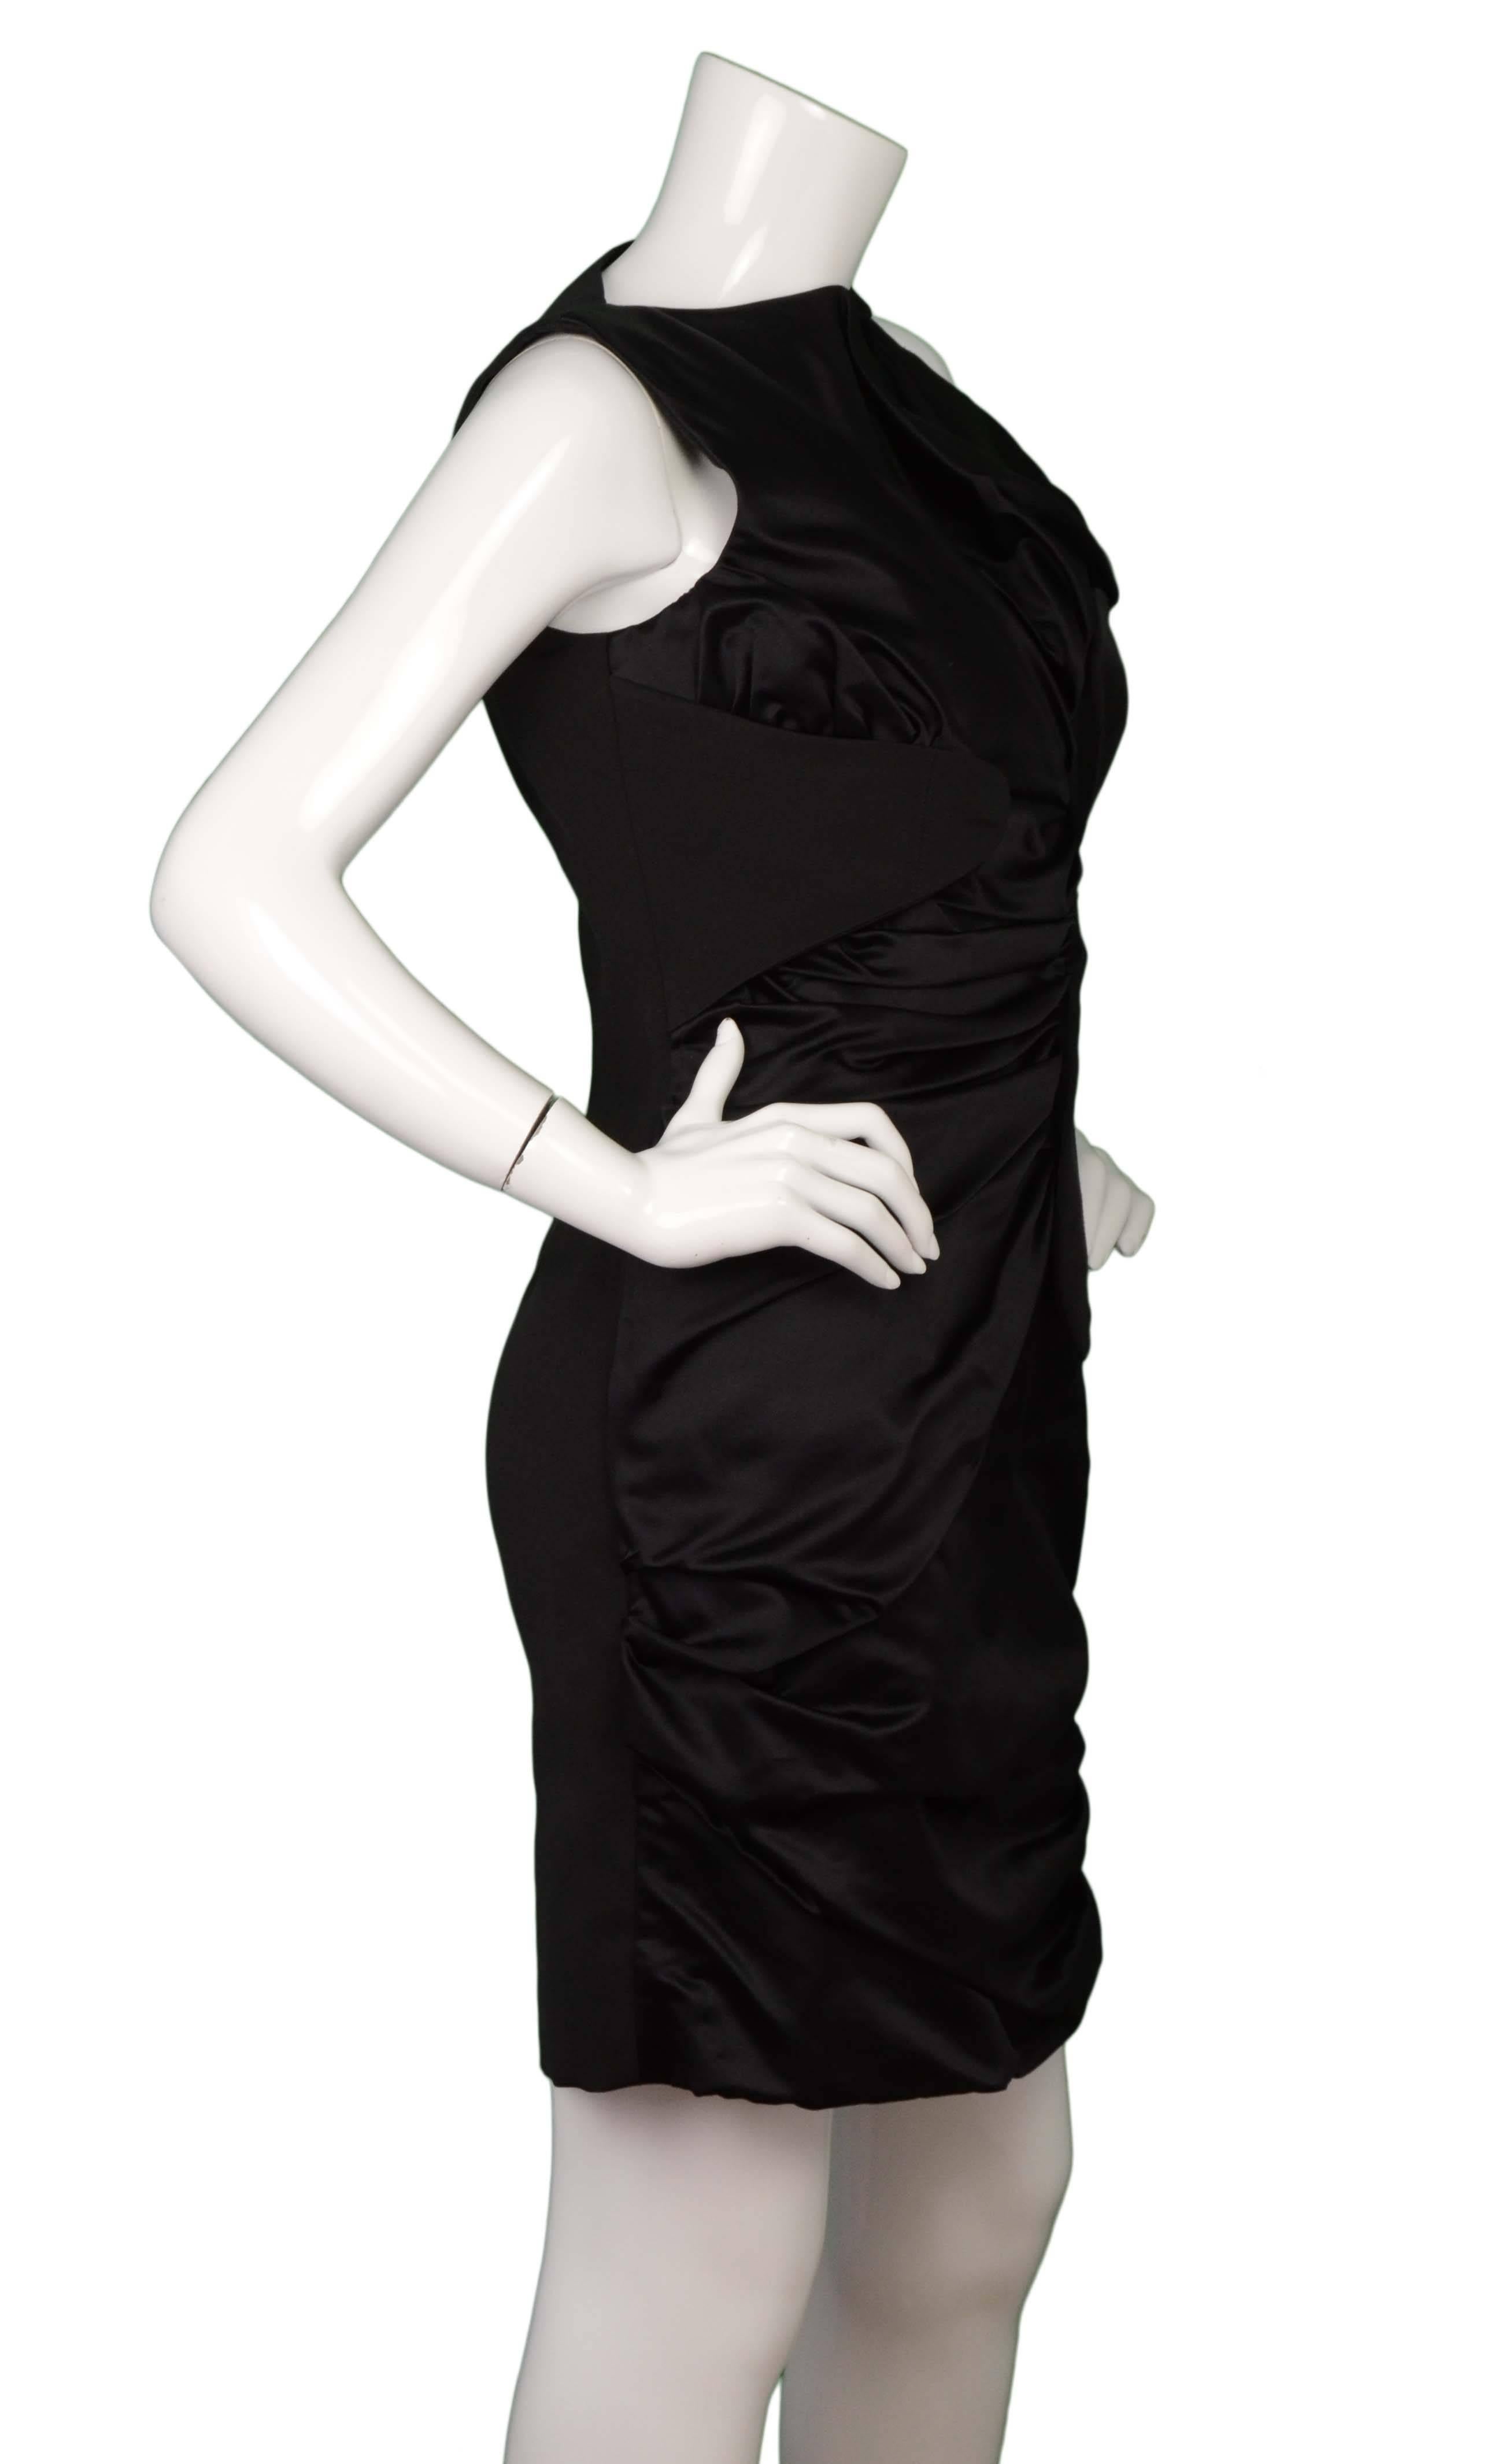 Marios Schwab Black Satin Sleeveless Cocktail Dress 
features ruching throughout
Made In: UK
Color: Black
Composition: Not given- beleived to be satin on front panel and grosgrain on back panel
Lining: Beige satin
Closure/Opening: Back center